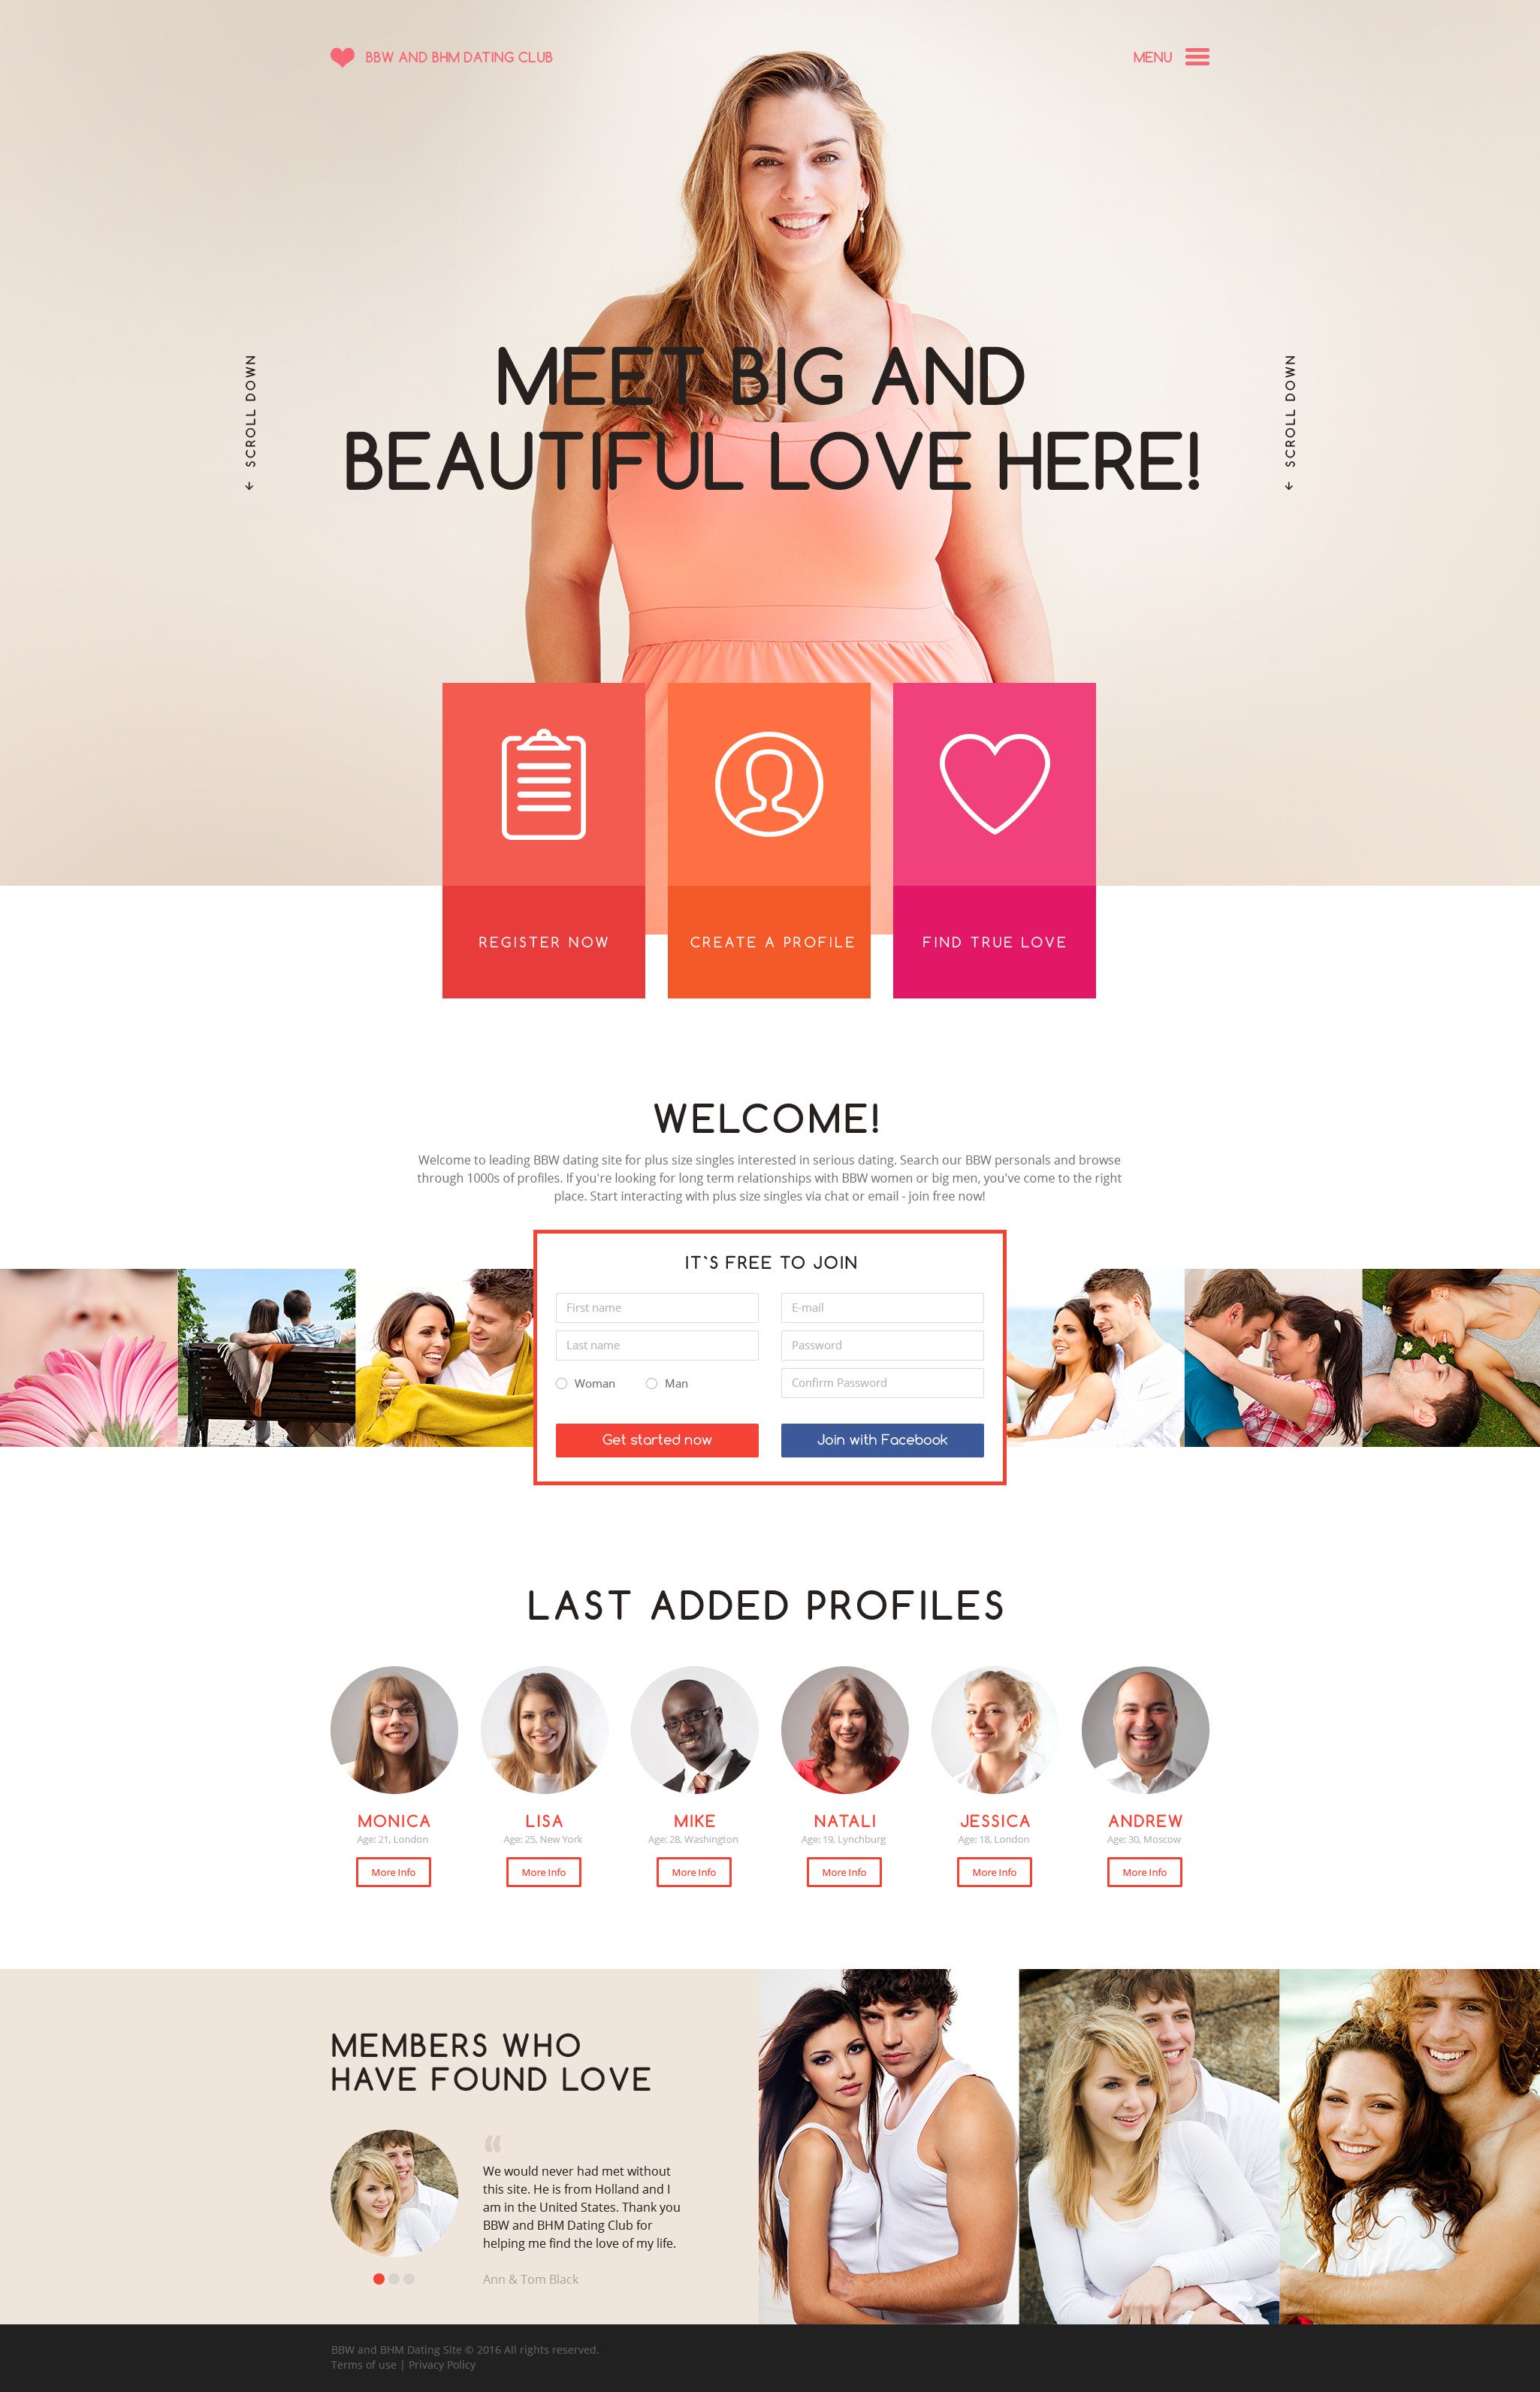 Free Bootstrap Templates for Next Responsive HTML5 Sites